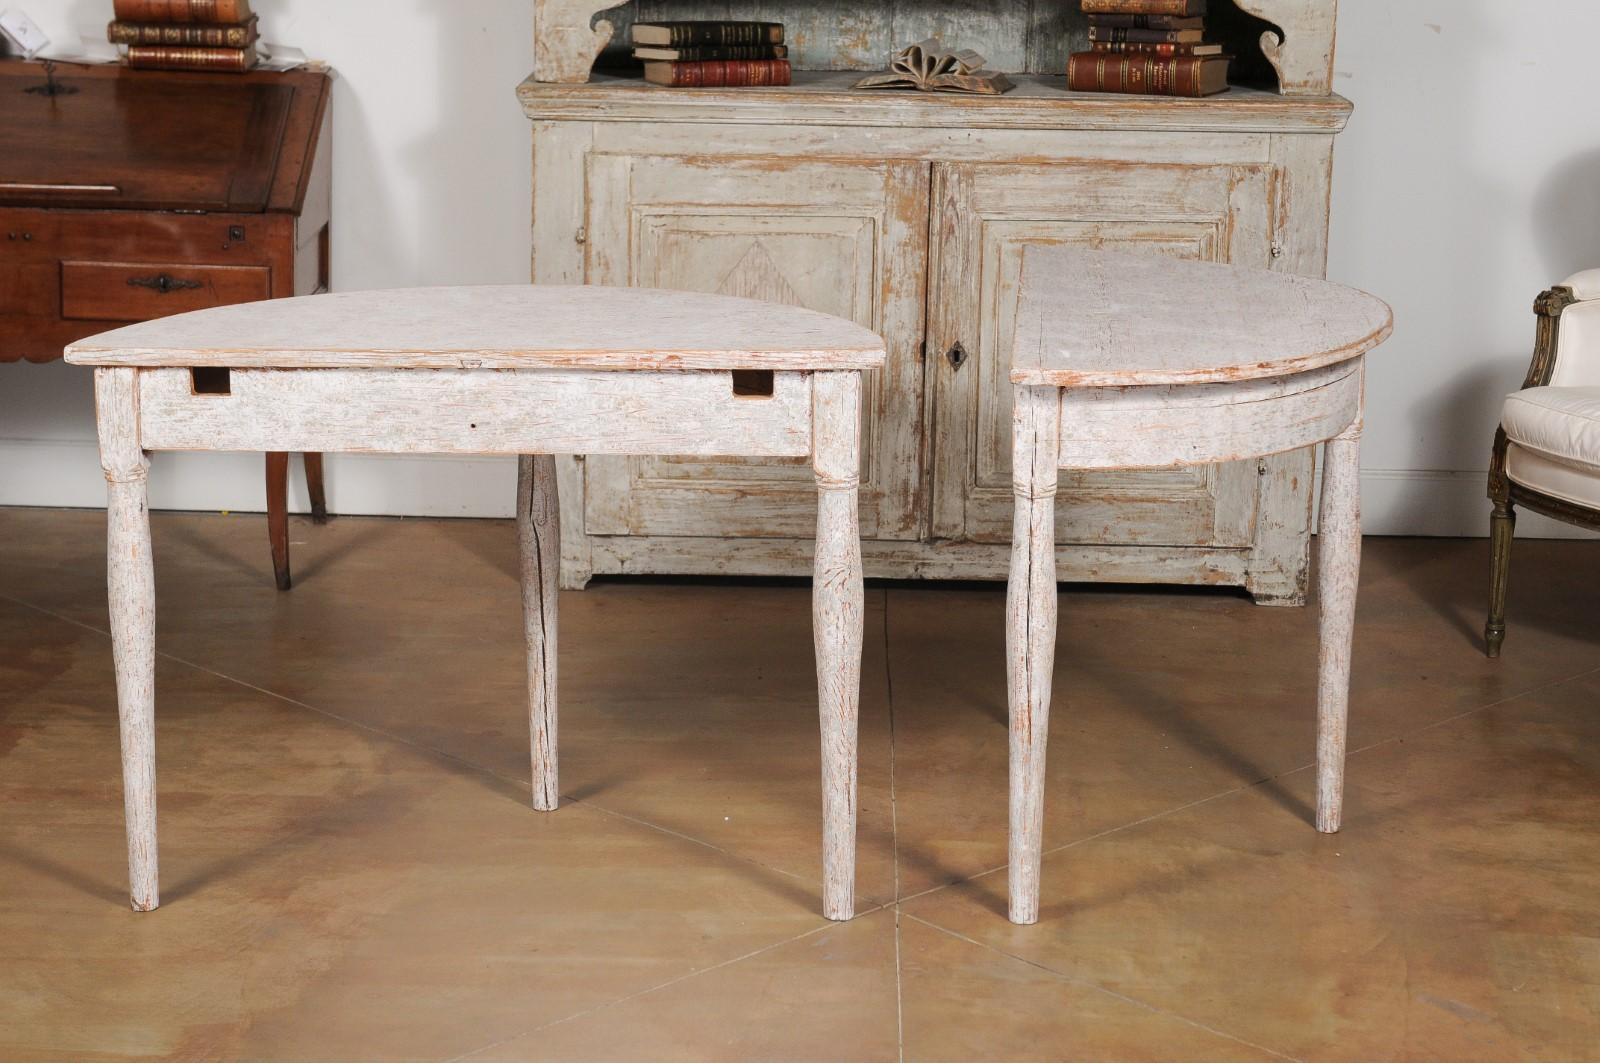 Pair of 1840s Swedish Painted Wood Demilune Tables with Distressed Finish 2